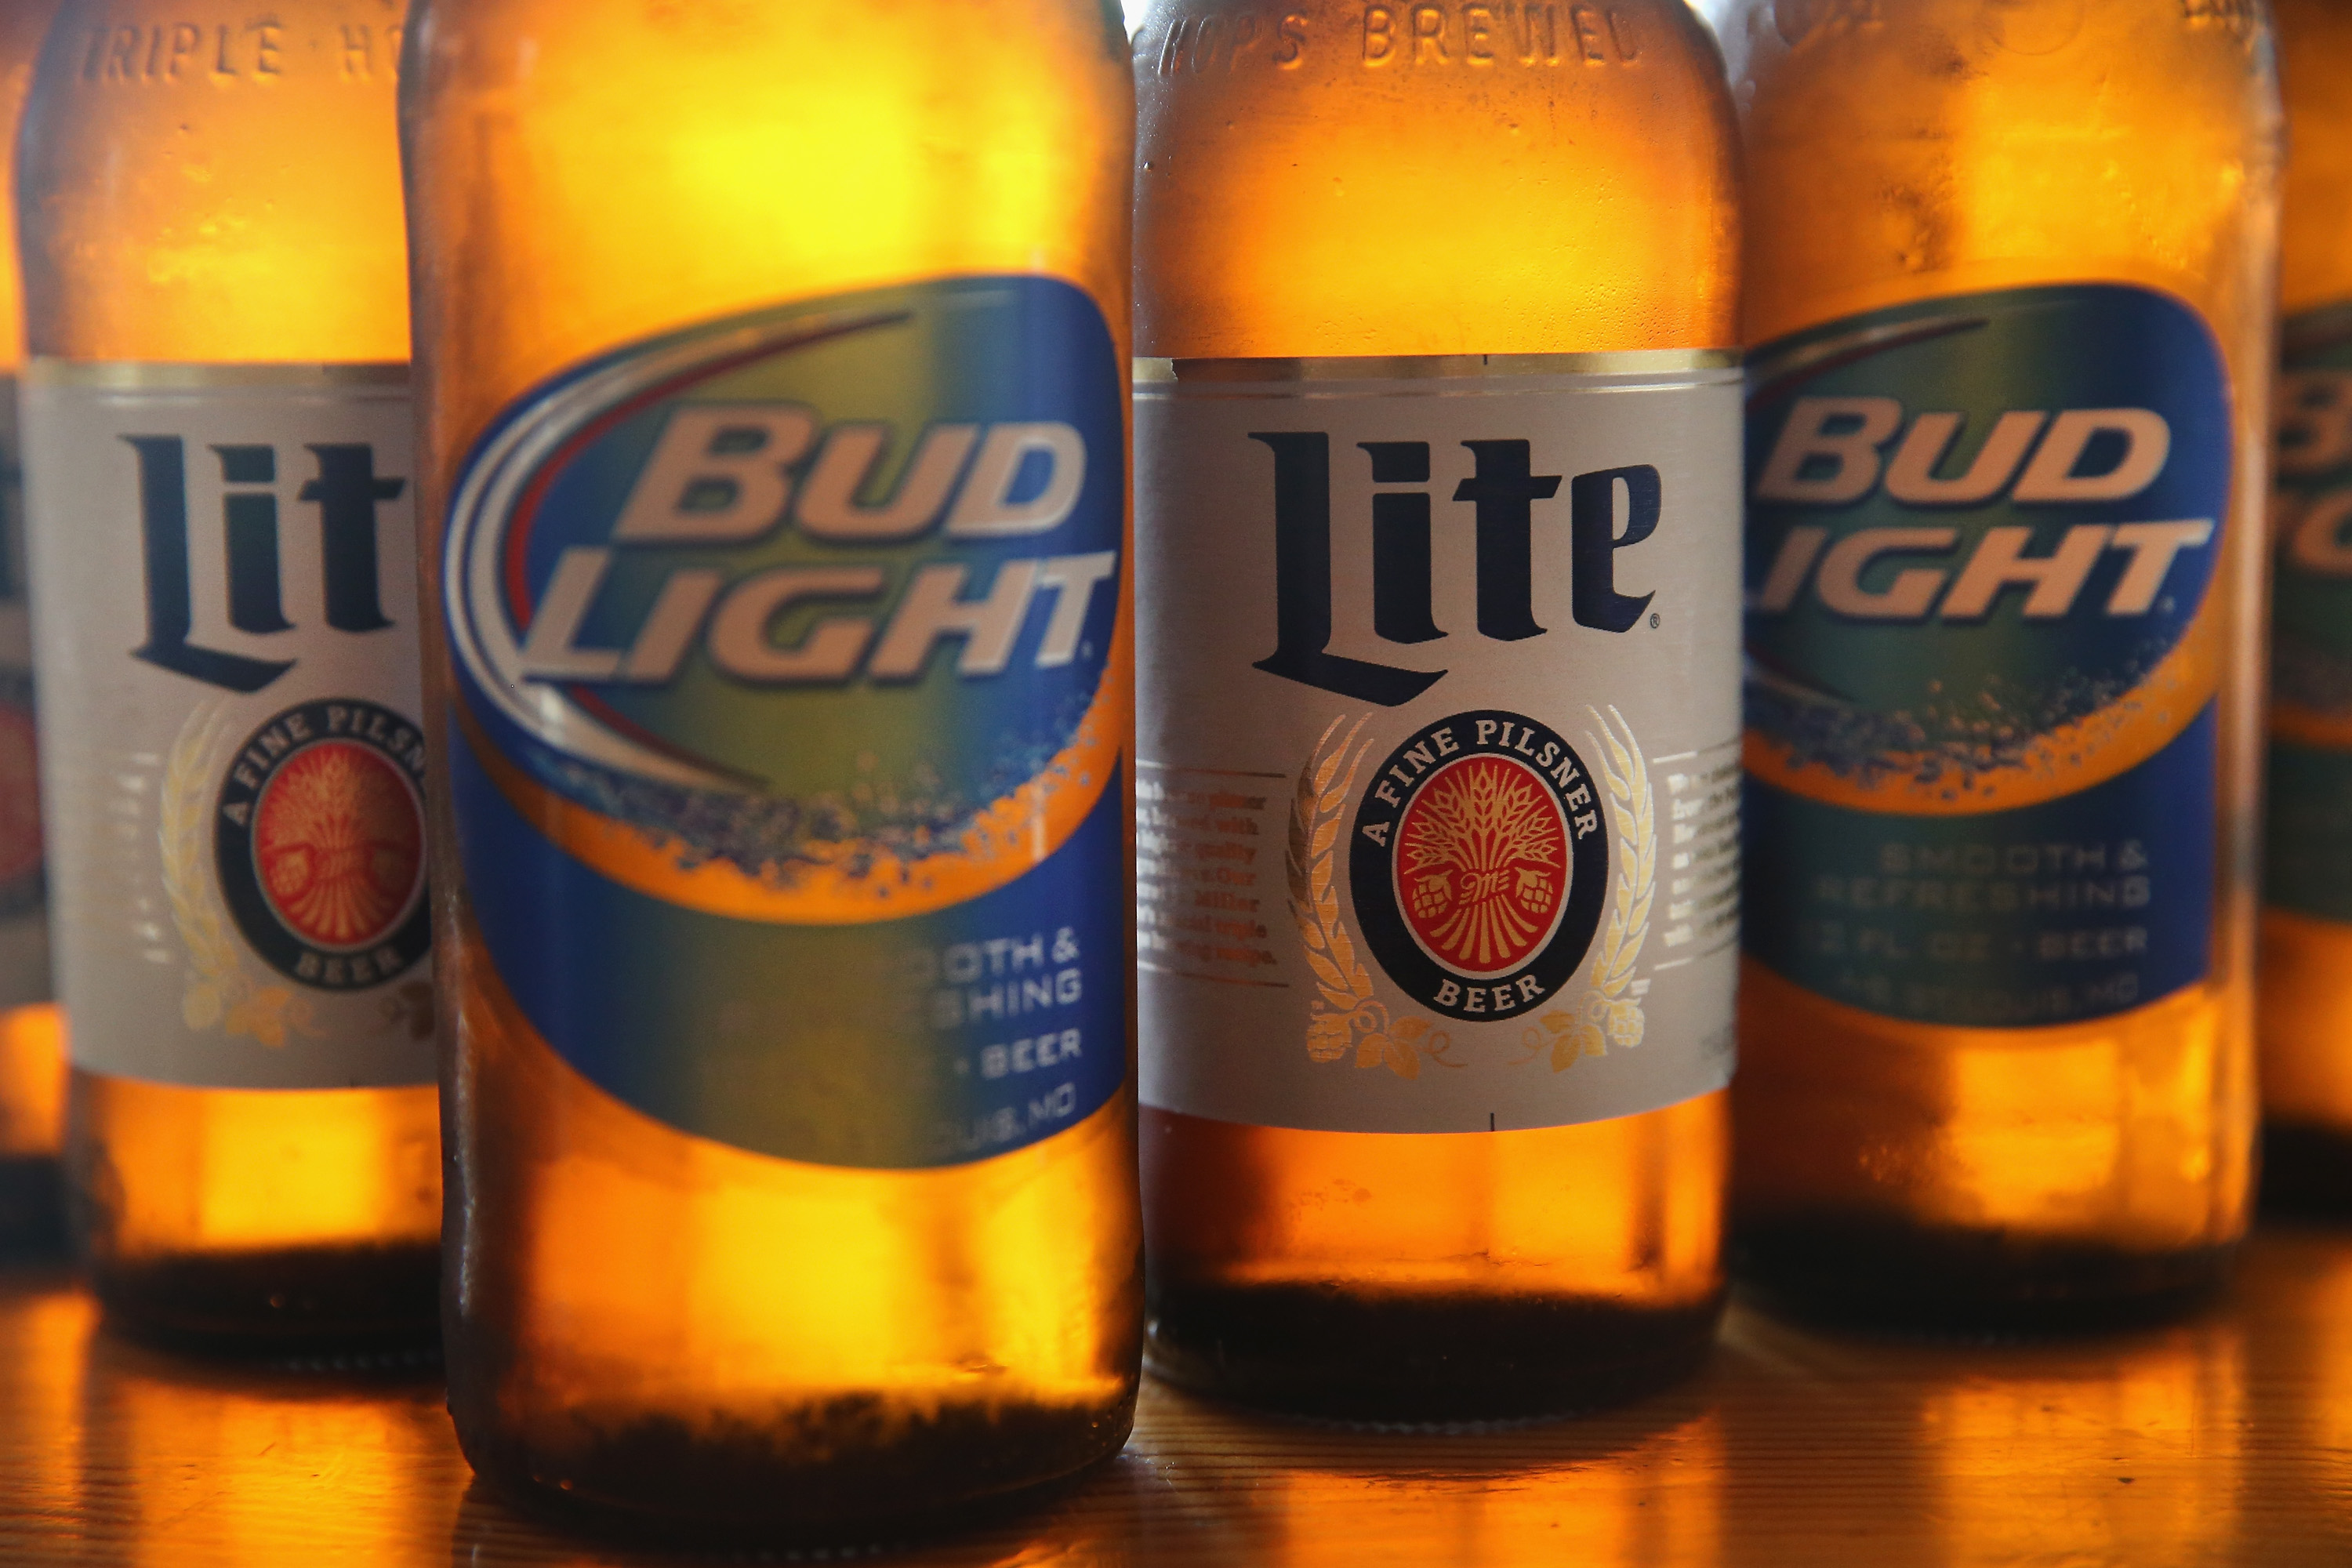 In this photo illustration, bottles of Miller Lite and Bud Light beer that are products of SABMiller and Anheuser-Busch InBev (respectively) are shown on September 15, 2014 in Chicago. Illinois. (Scott Olson&mdash;Getty Images)